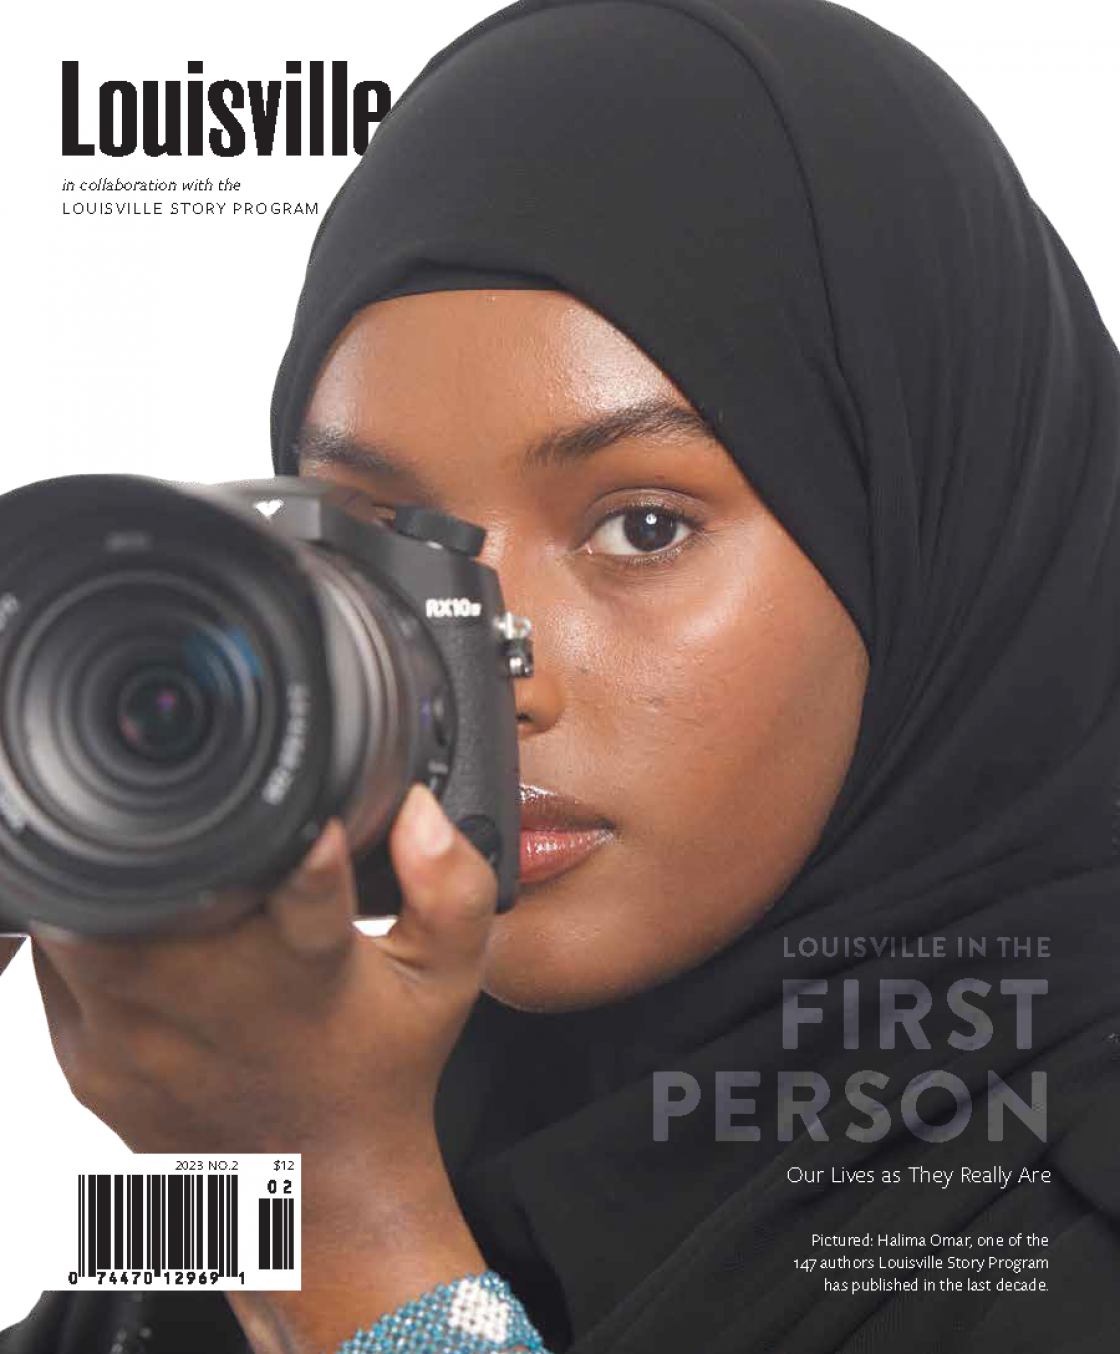 Special Edition of Louisville Magazine